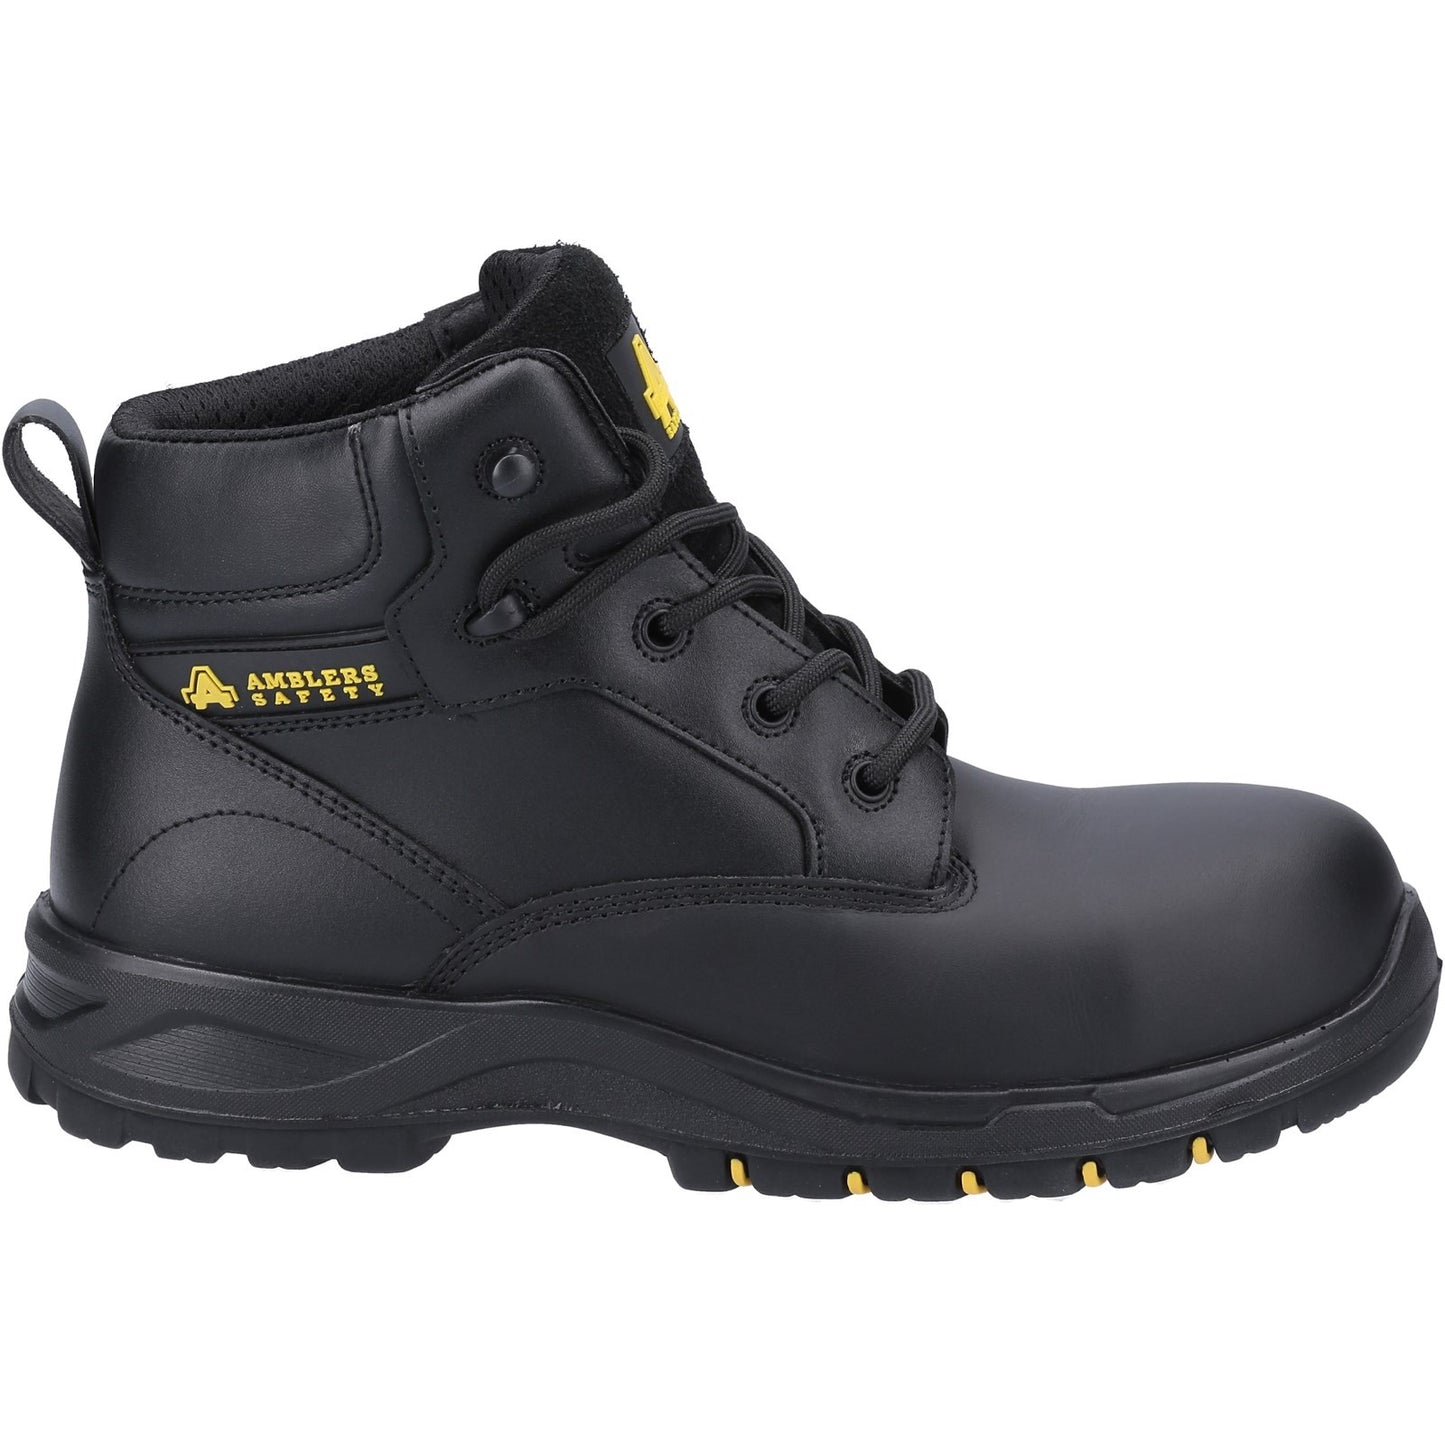 Women's Amblers Safety AS605C Safety Boots